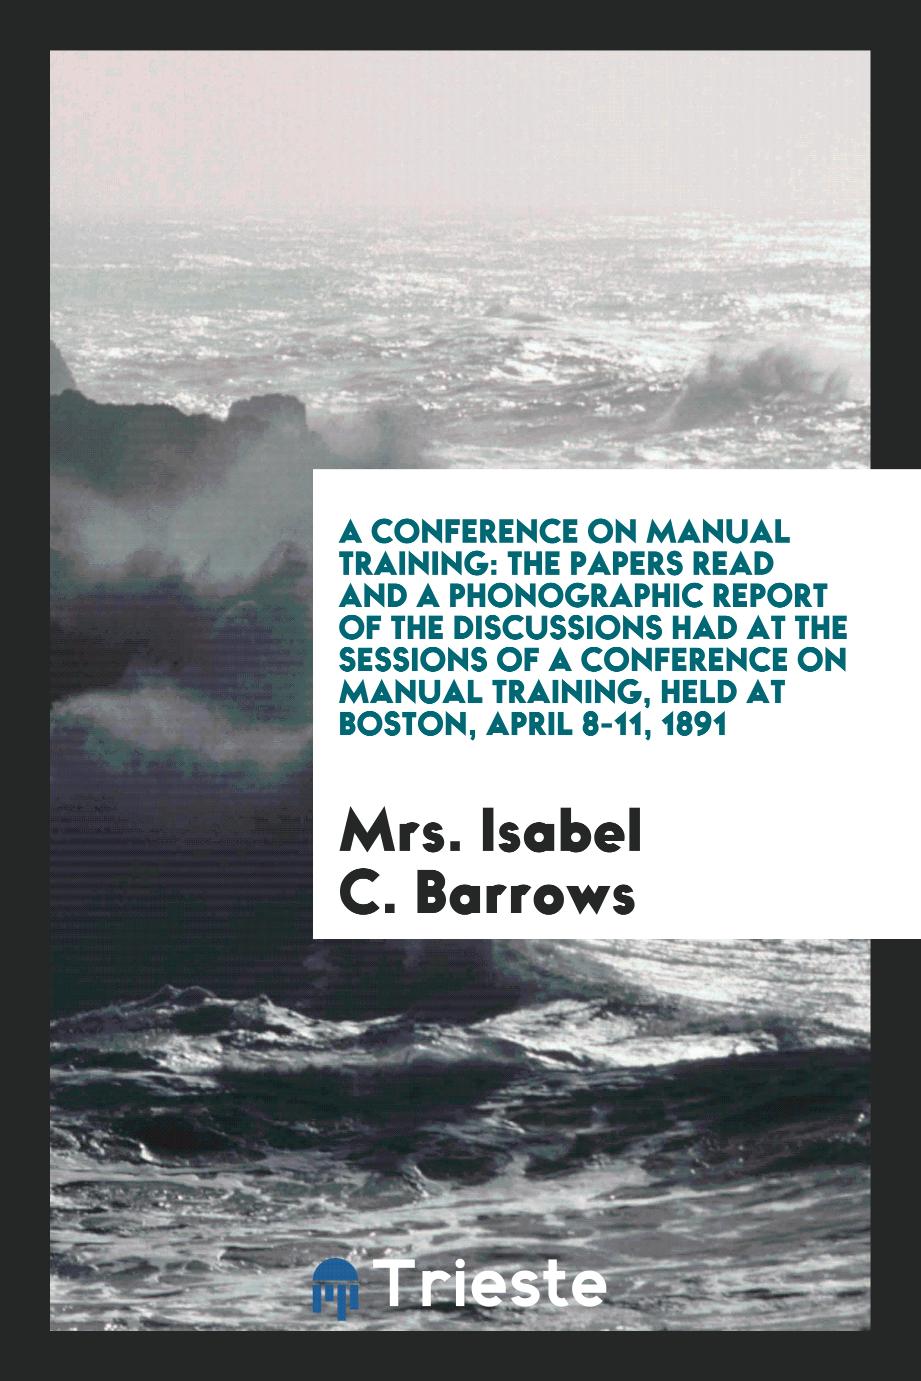 A Conference on Manual Training: The Papers Read and a Phonographic Report of the Discussions Had at the Sessions of a Conference on Manual Training, Held at Boston, April 8-11, 1891